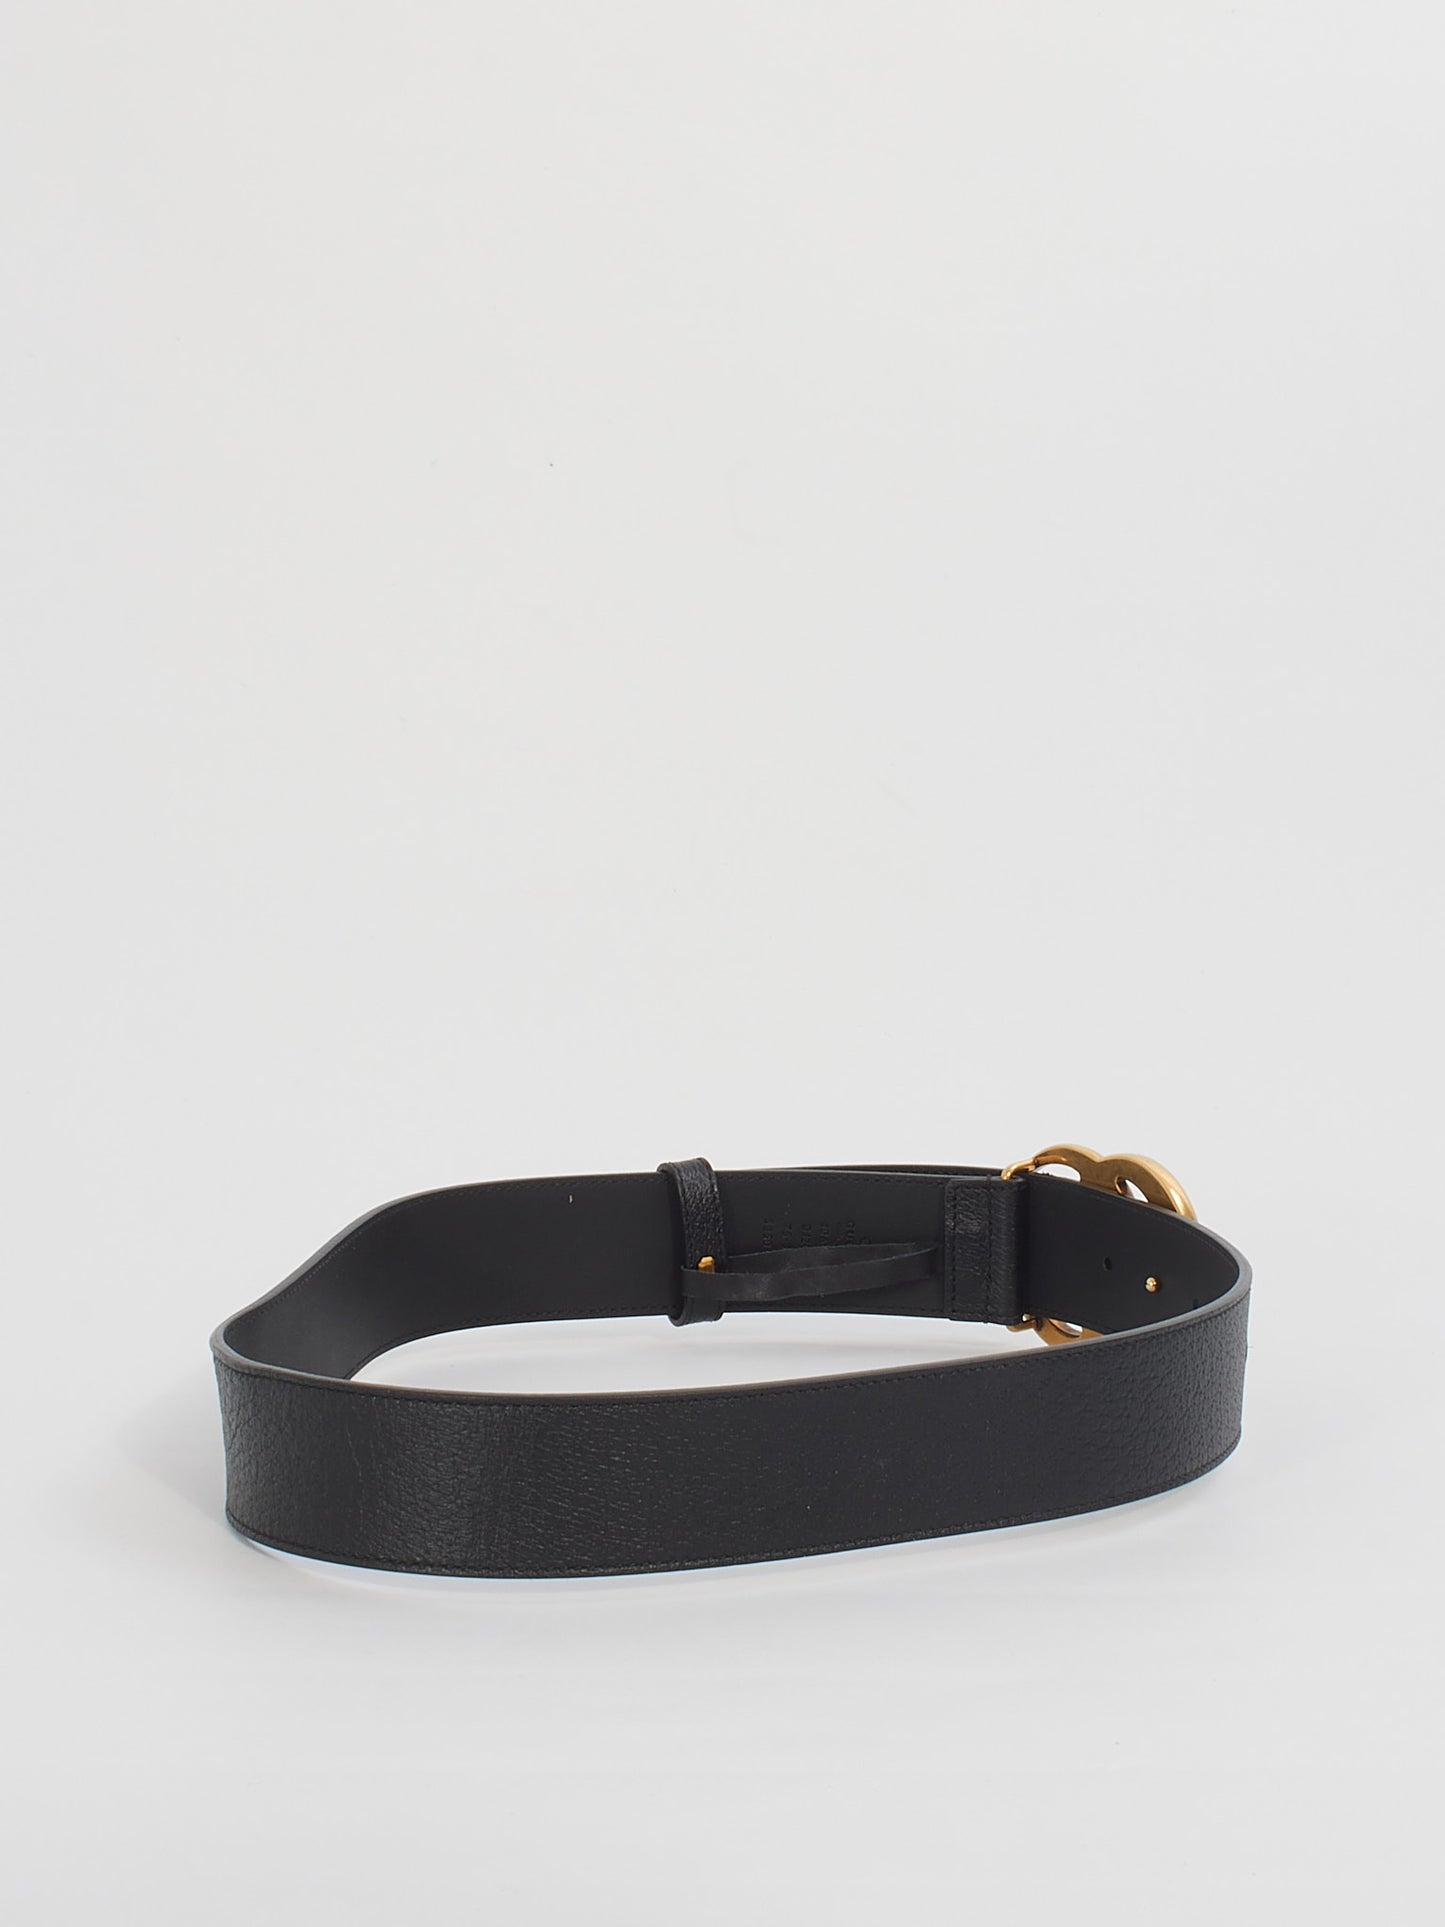 Gucci Black Leather GG Marmont Buckle Belt - 75/30